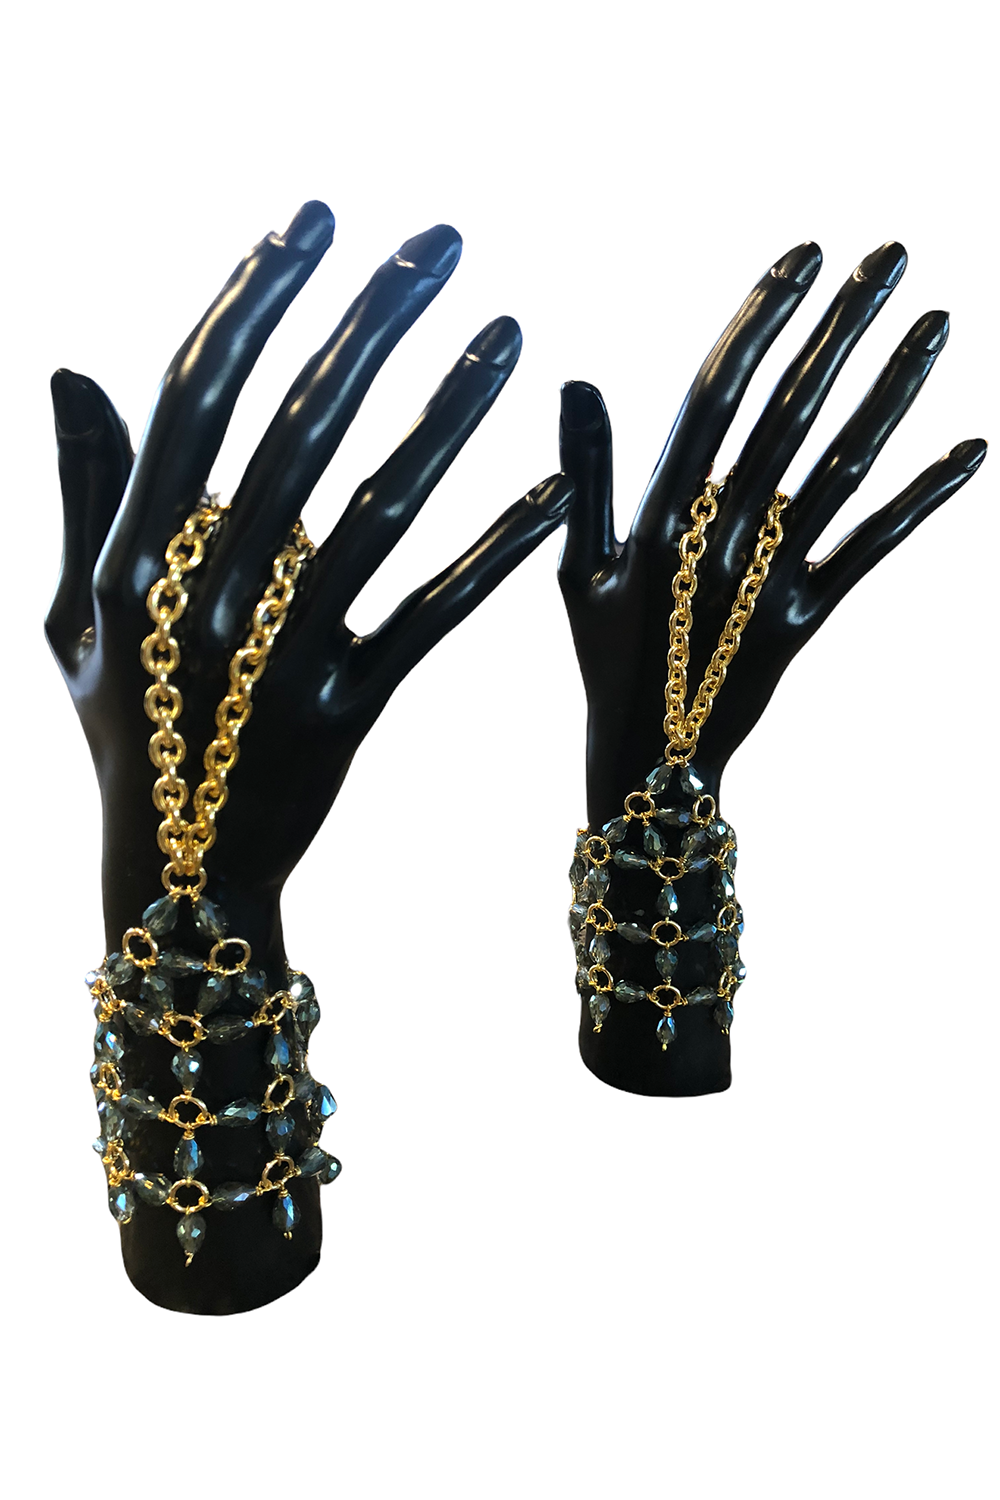 The Presley Hand Harness